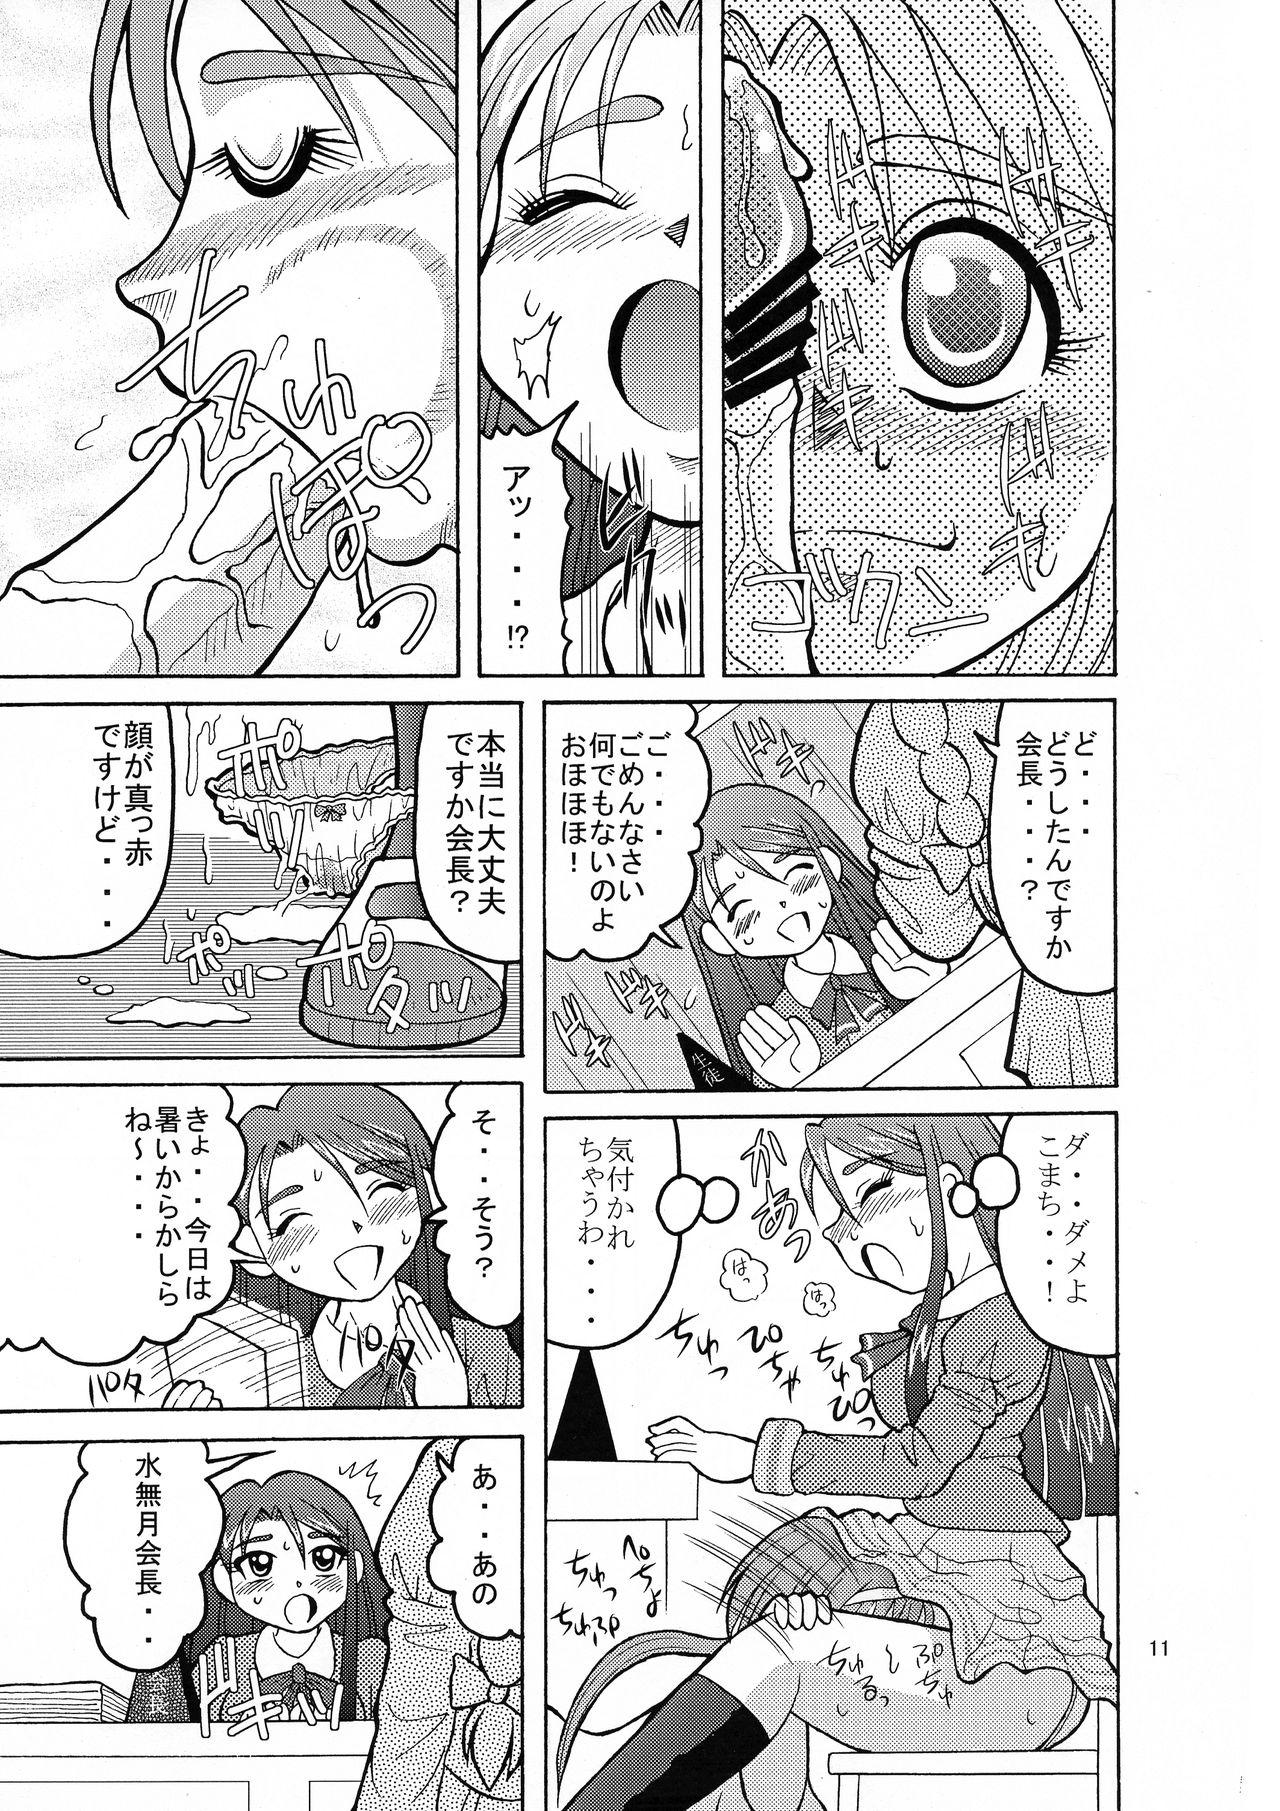 Deep Komakare GO! GO! - Yes precure 5 Polla - Page 11